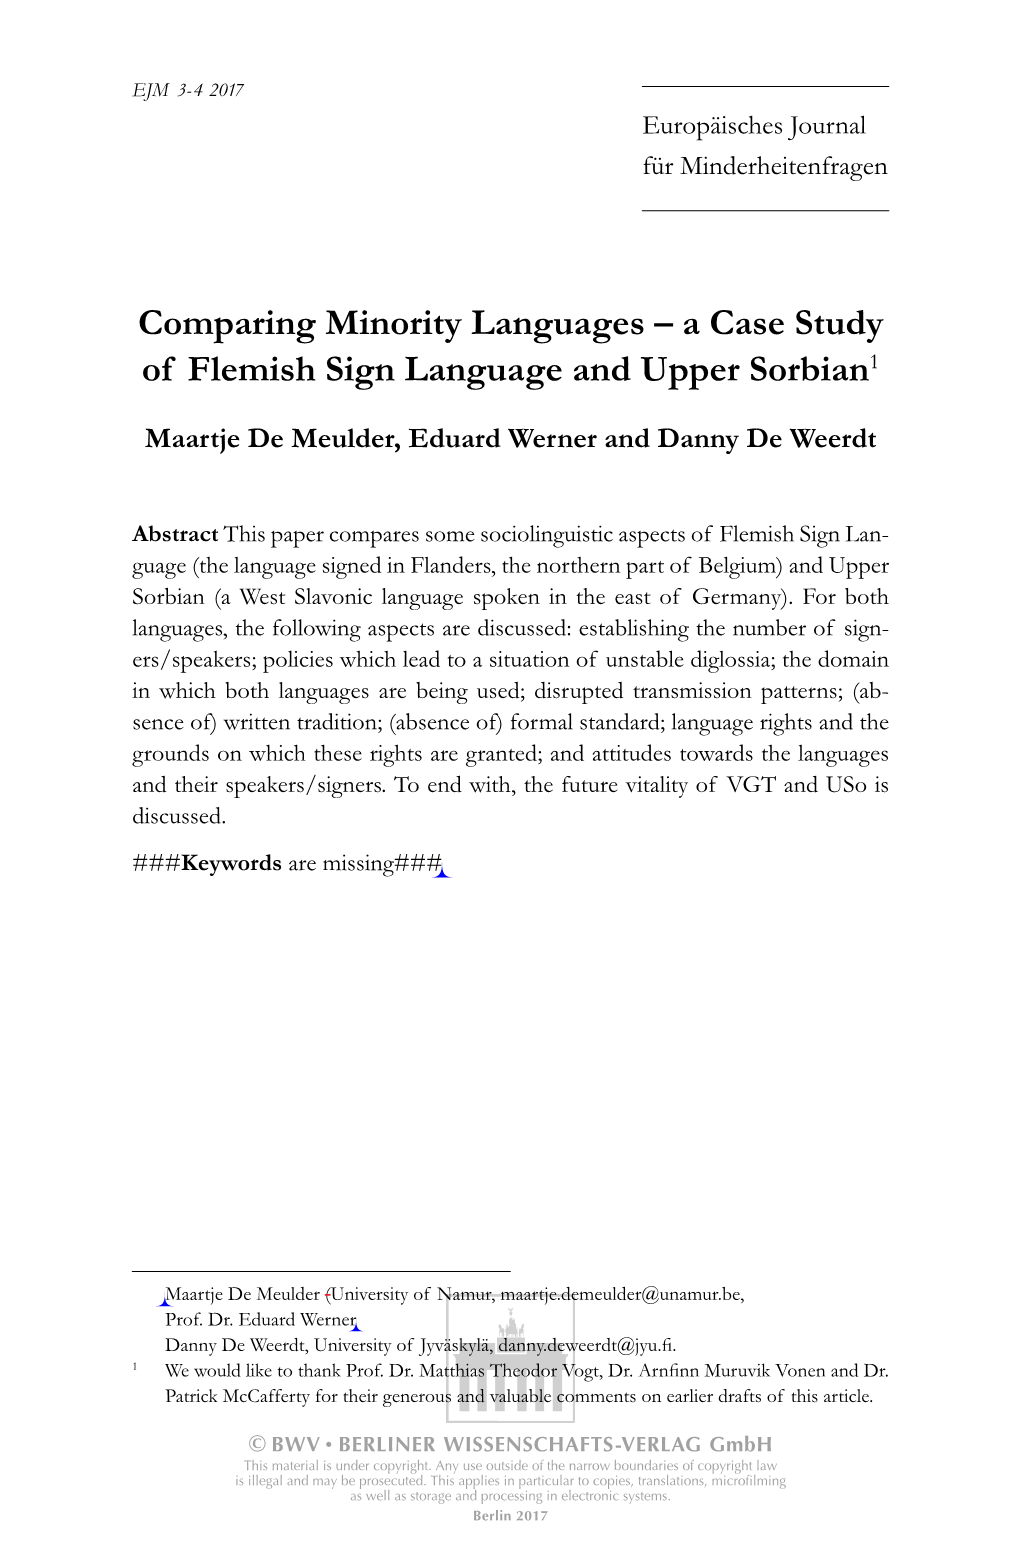 Comparing Minority Languages – a Case Study of Flemish Sign Language and Upper Sorbian1